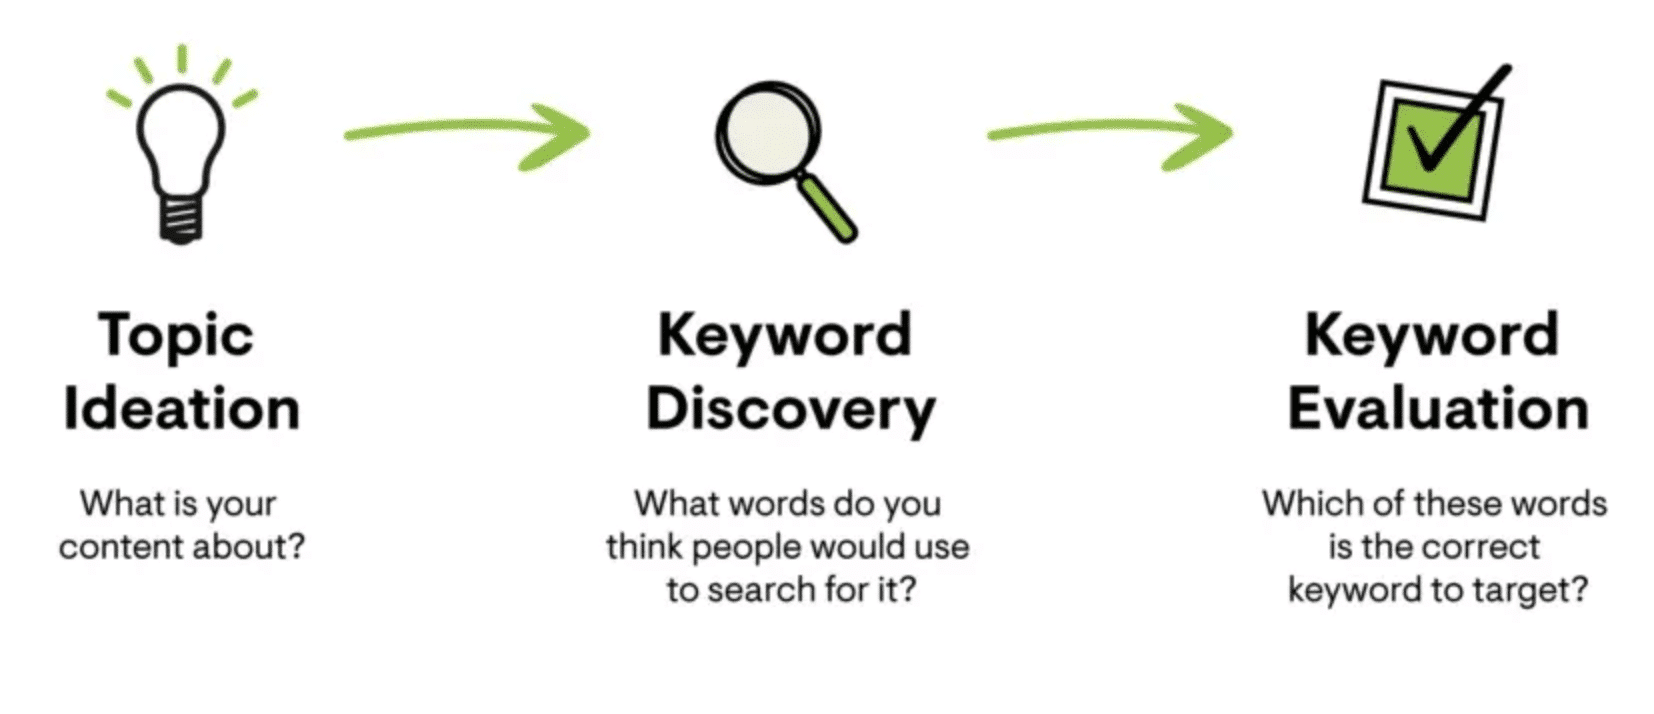 image shows steps to finding best keywords to rank on SERPs